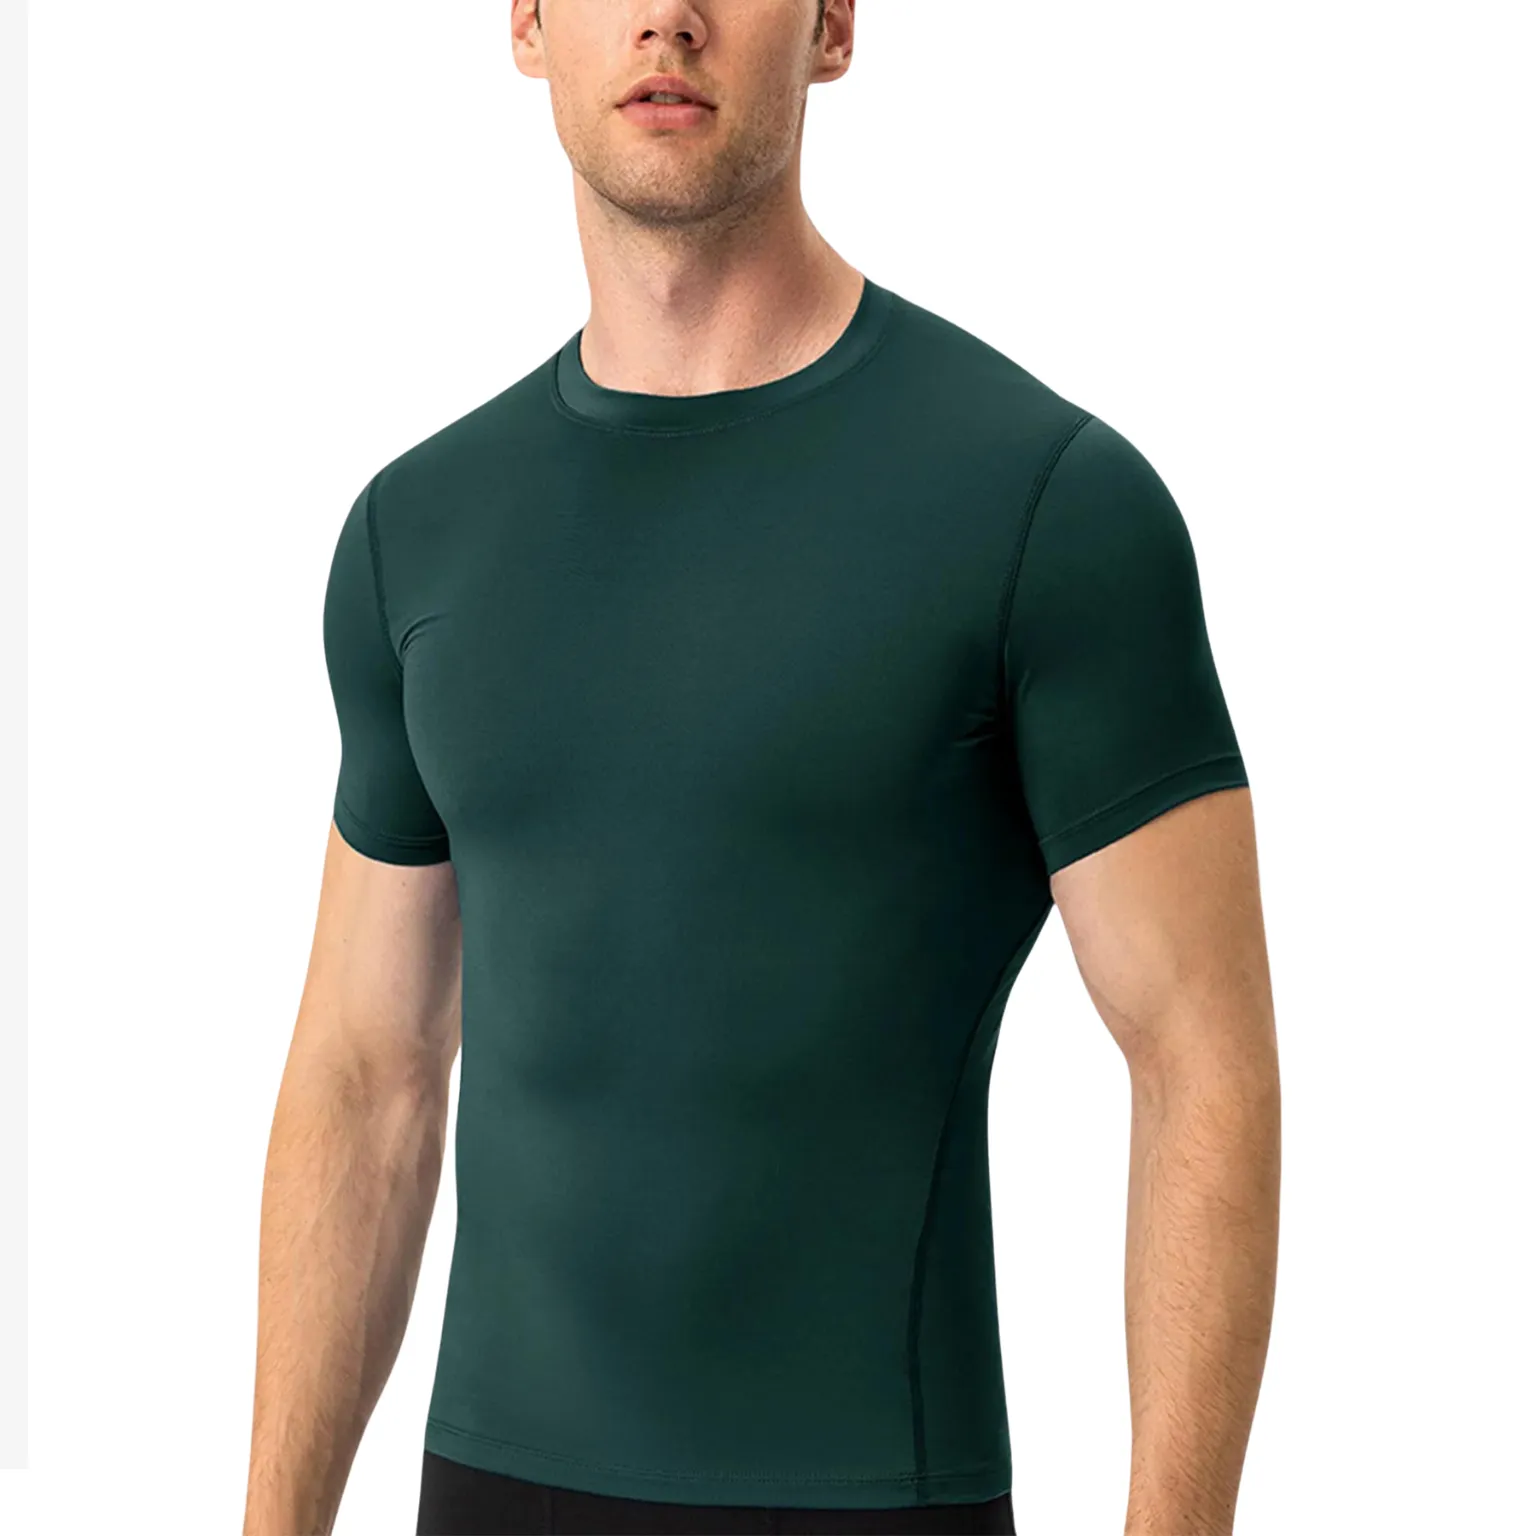 Base Layer T-shirt manufacturing with trendy design